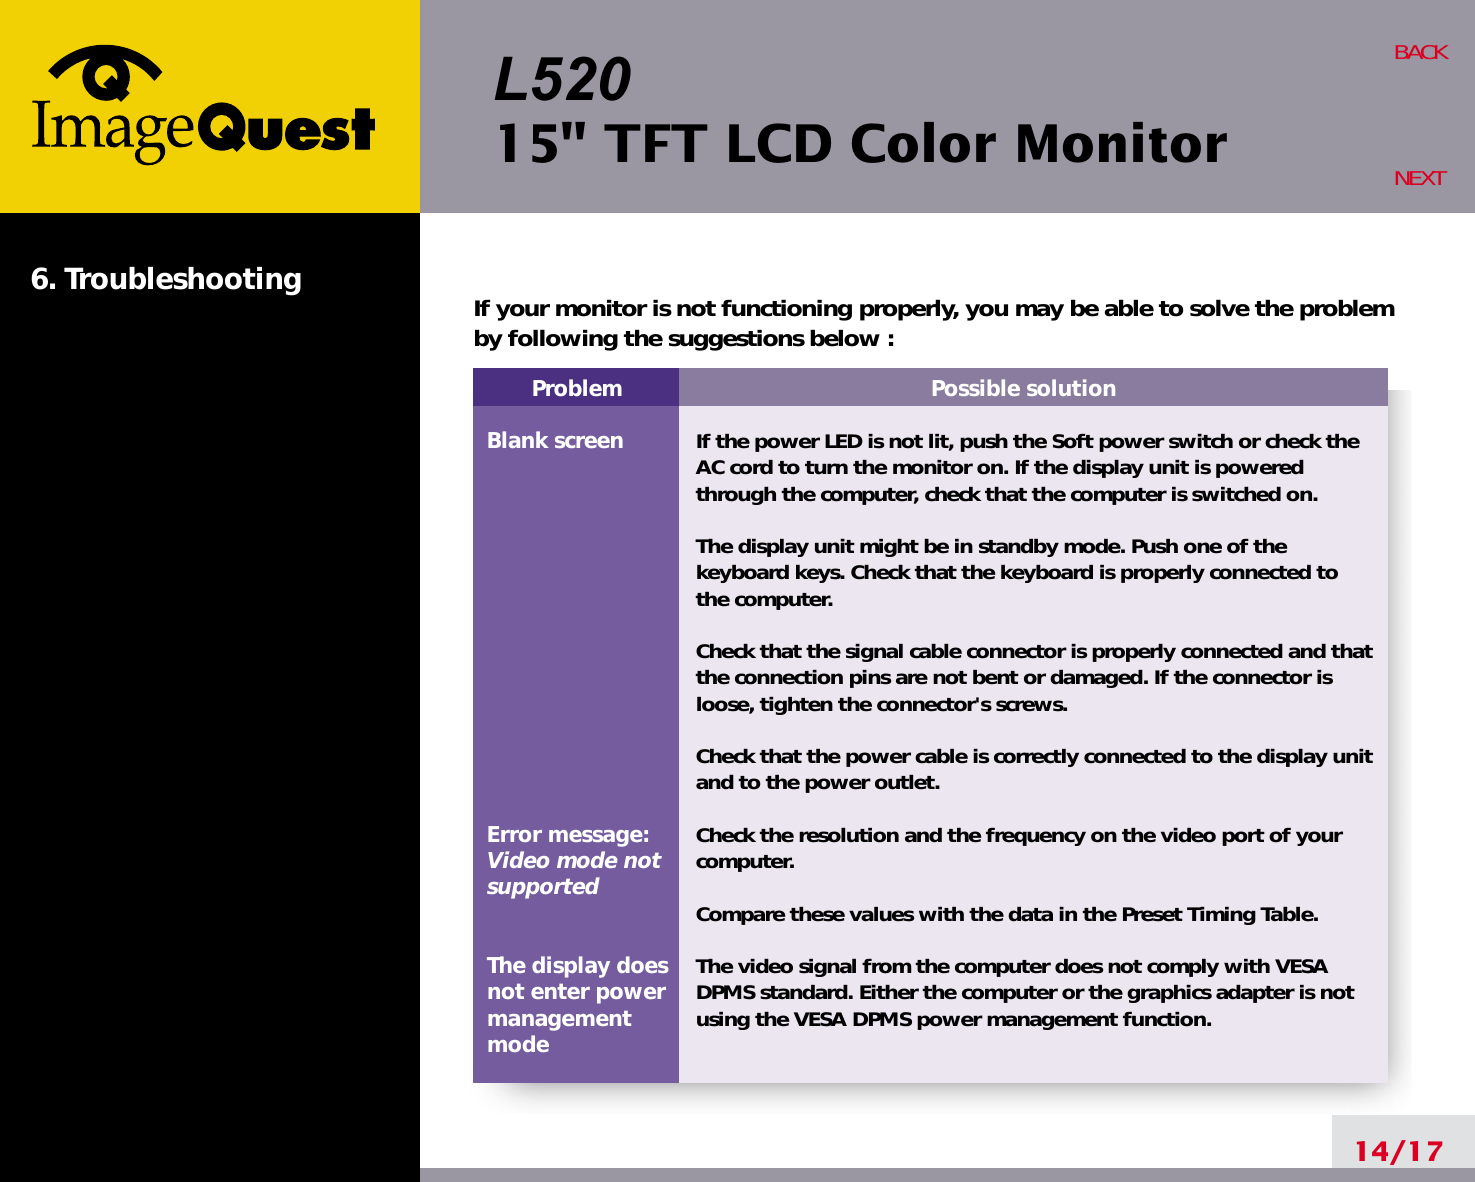 L52015&quot; TFT LCD Color Monitor6. Troubleshooting14/17BACKNEXTProblemBlank screenError message:Video mode notsupportedThe display does not enter power managementmodePossible solutionIf the power LED is not lit, push the Soft power switch or check theAC cord to turn the monitor on. If the display unit is poweredthrough the computer, check that the computer is switched on.The display unit might be in standby mode. Push one of thekeyboard keys. Check that the keyboard is properly connected tothe computer.Check that the signal cable connector is properly connected and thatthe connection pins are not bent or damaged. If the connector isloose, tighten the connector&apos;s screws.Check that the power cable is correctly connected to the display unitand to the power outlet. Check the resolution and the frequency on the video port of yourcomputer.Compare these values with the data in the Preset Timing Table.The video signal from the computer does not comply with VESADPMS standard. Either the computer or the graphics adapter is notusing the VESA DPMS power management function.If your monitor is not functioning properly, you may be able to solve the problemby following the suggestions below :